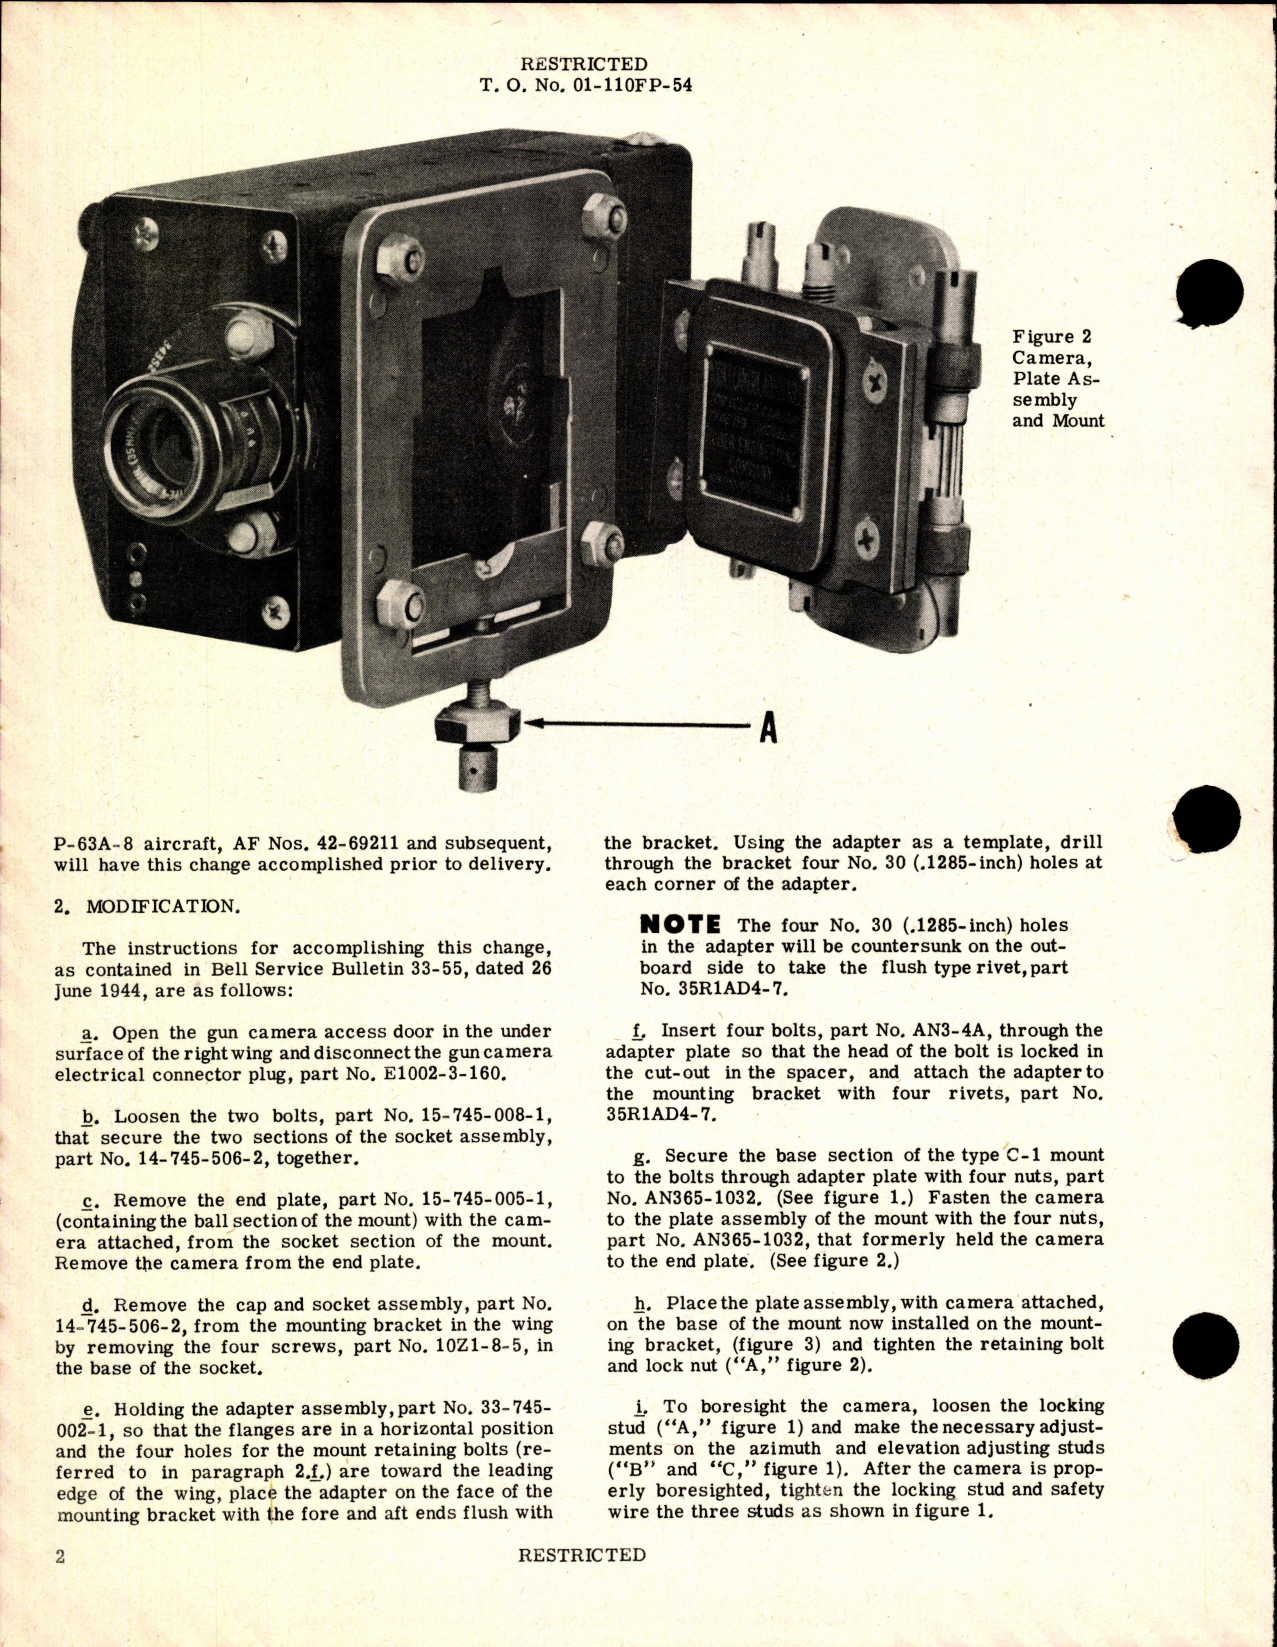 Sample page 2 from AirCorps Library document: Installation of Type C-1 Gun Camera Mount for P-63A